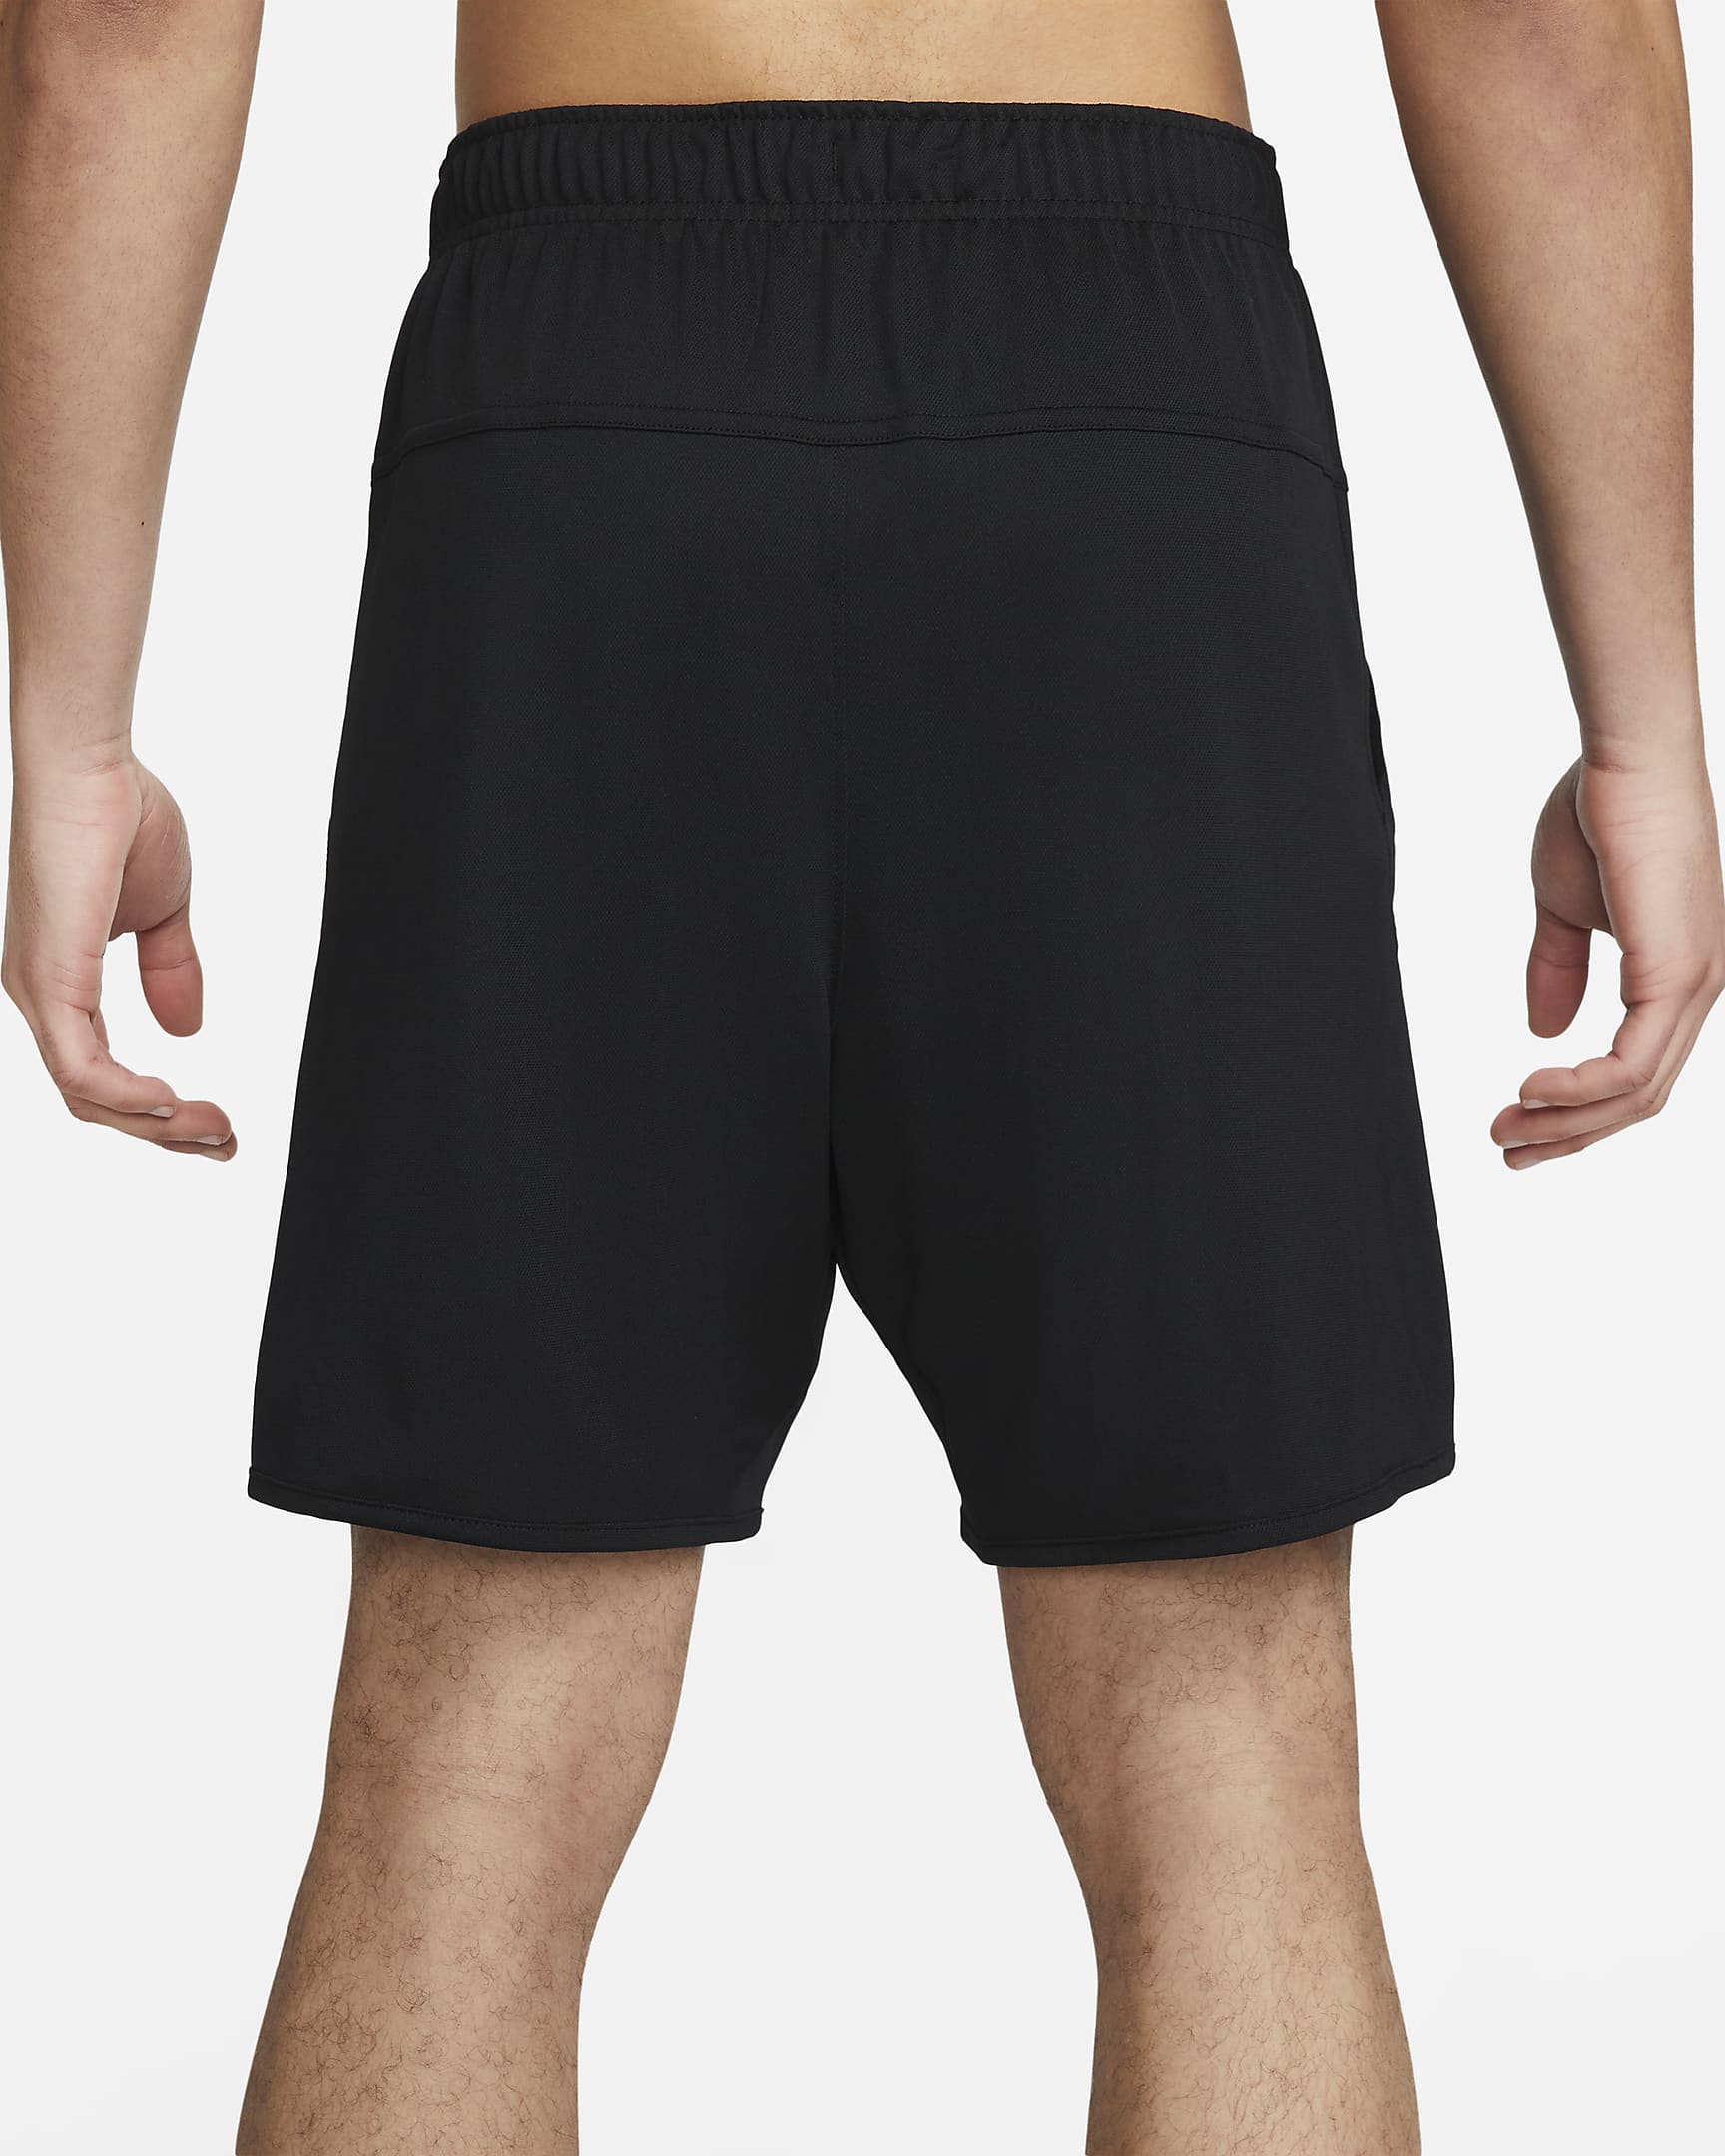 MENS DRI-FIT TOTALITY 7-INCH UNLINED KNIT SHORT - FB4196